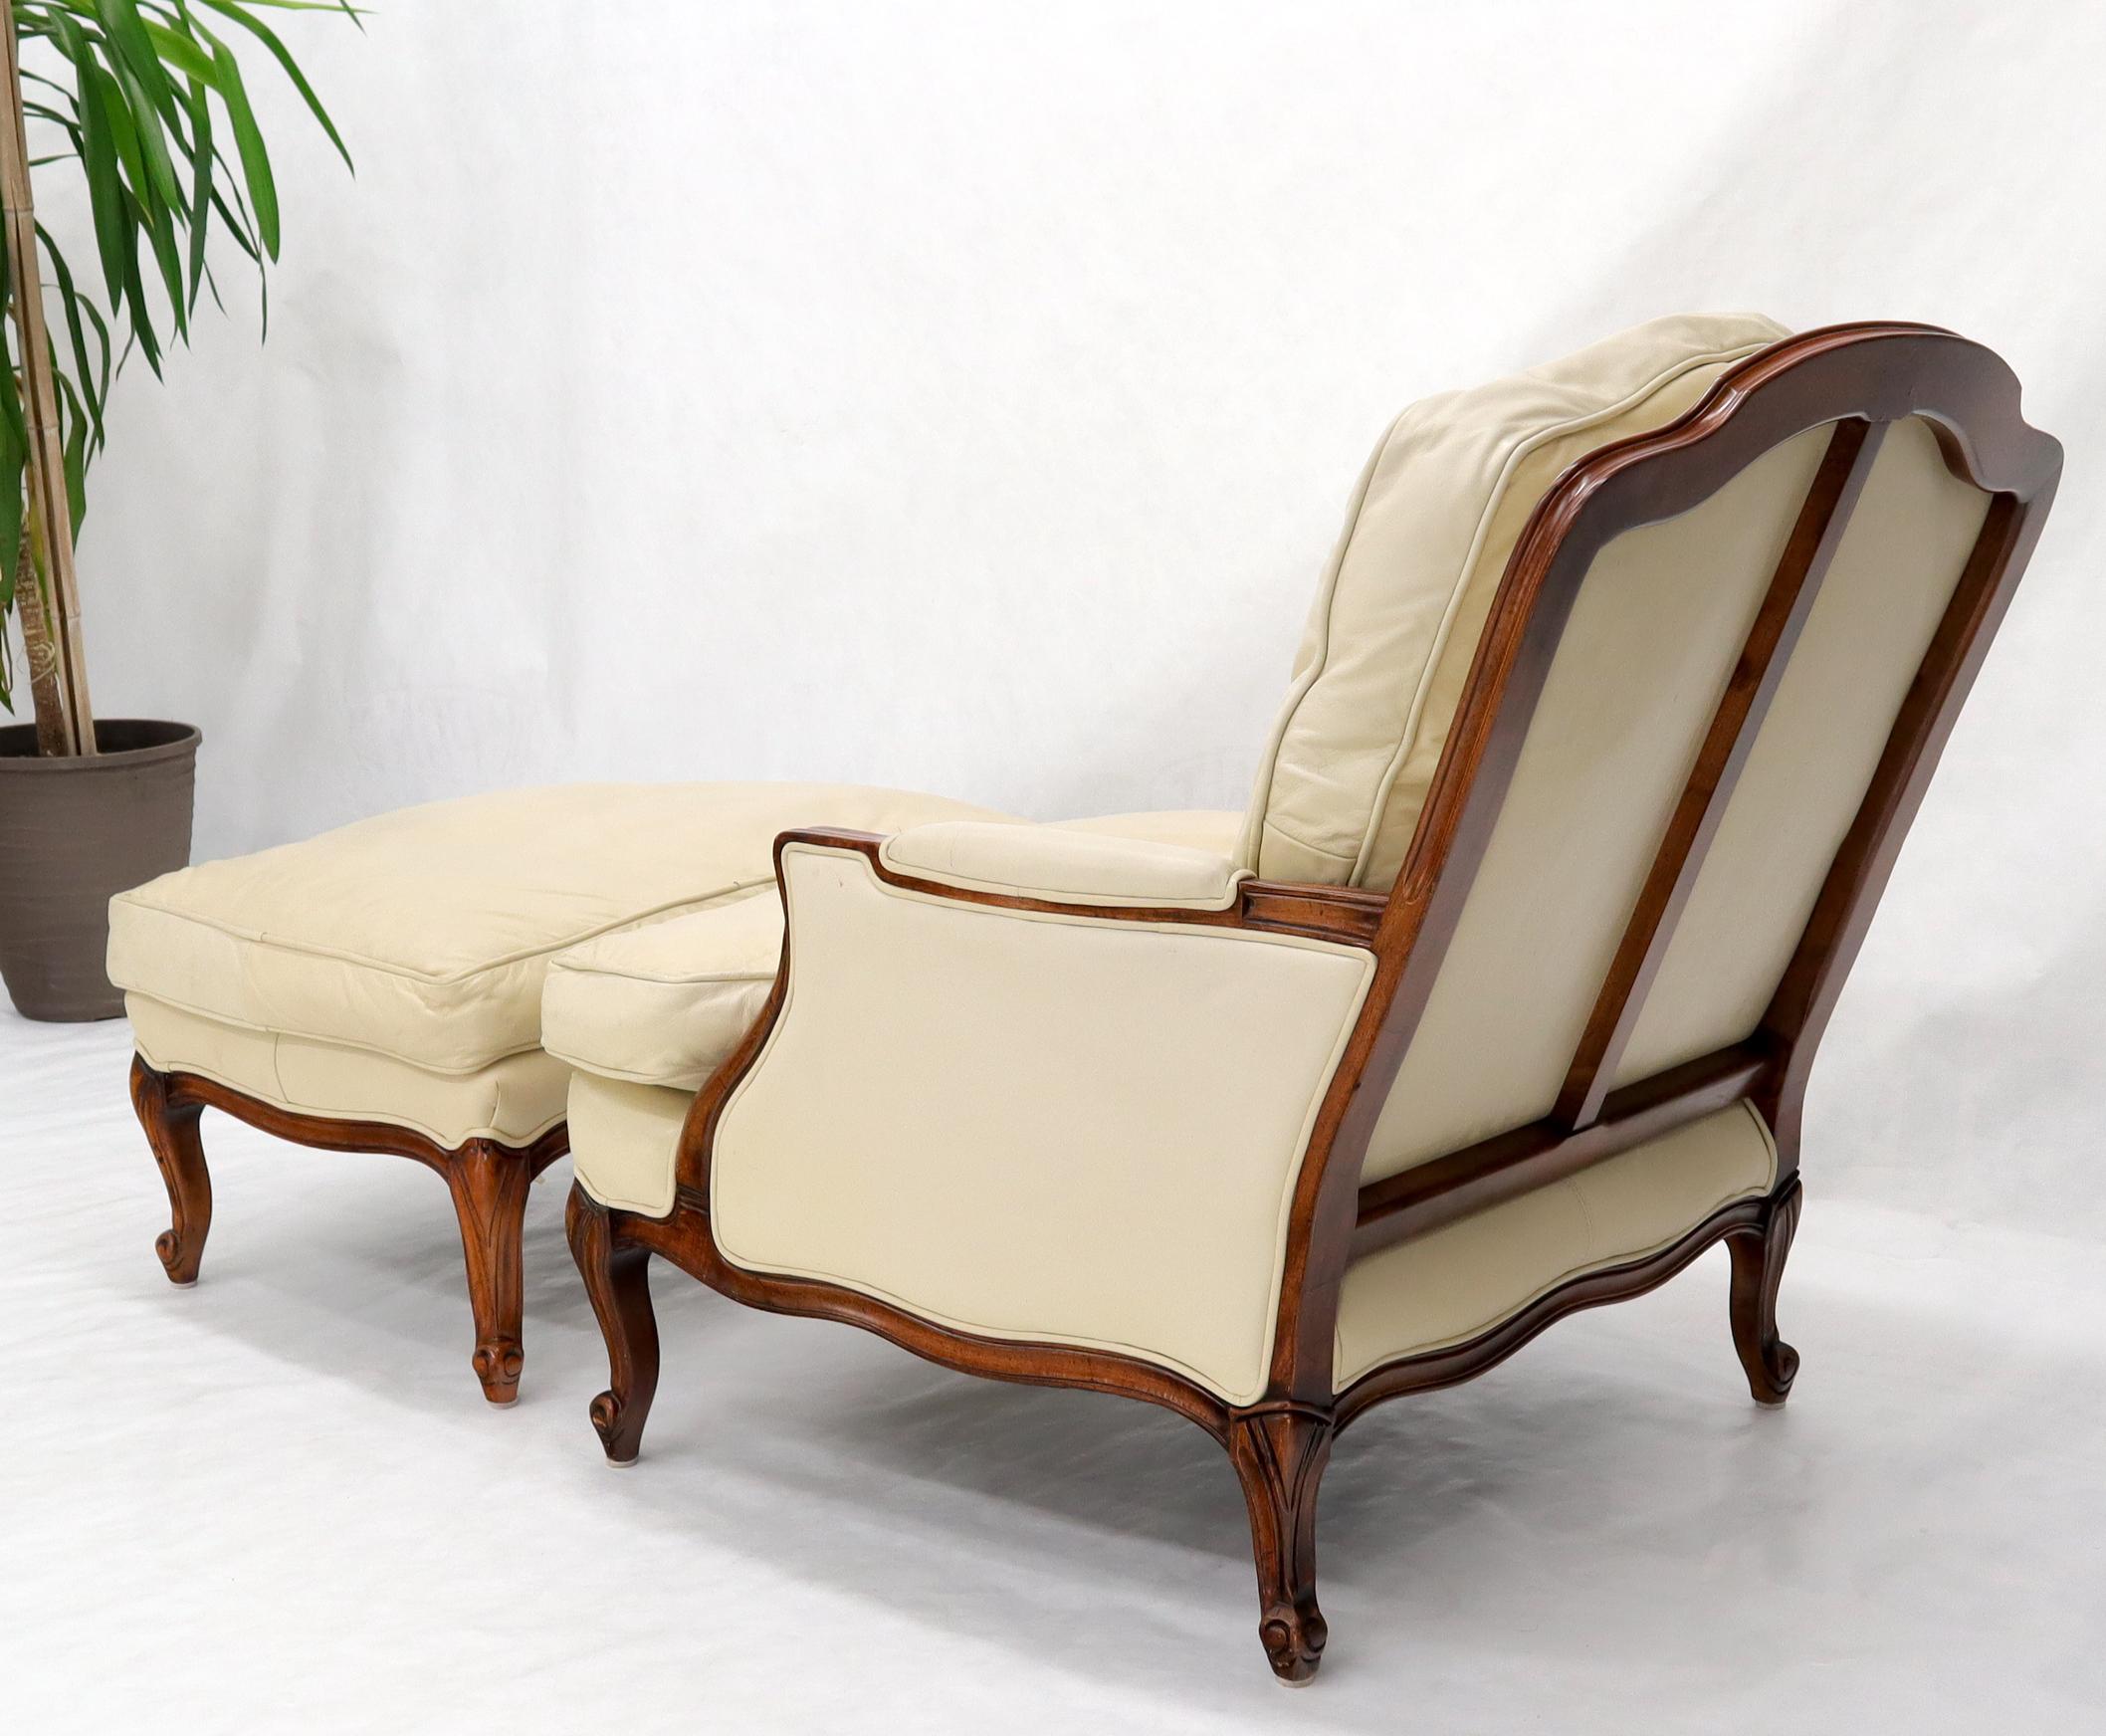 Cream Leather Chaise 2-Part Chaise Lounge Chair and Ottoman 8